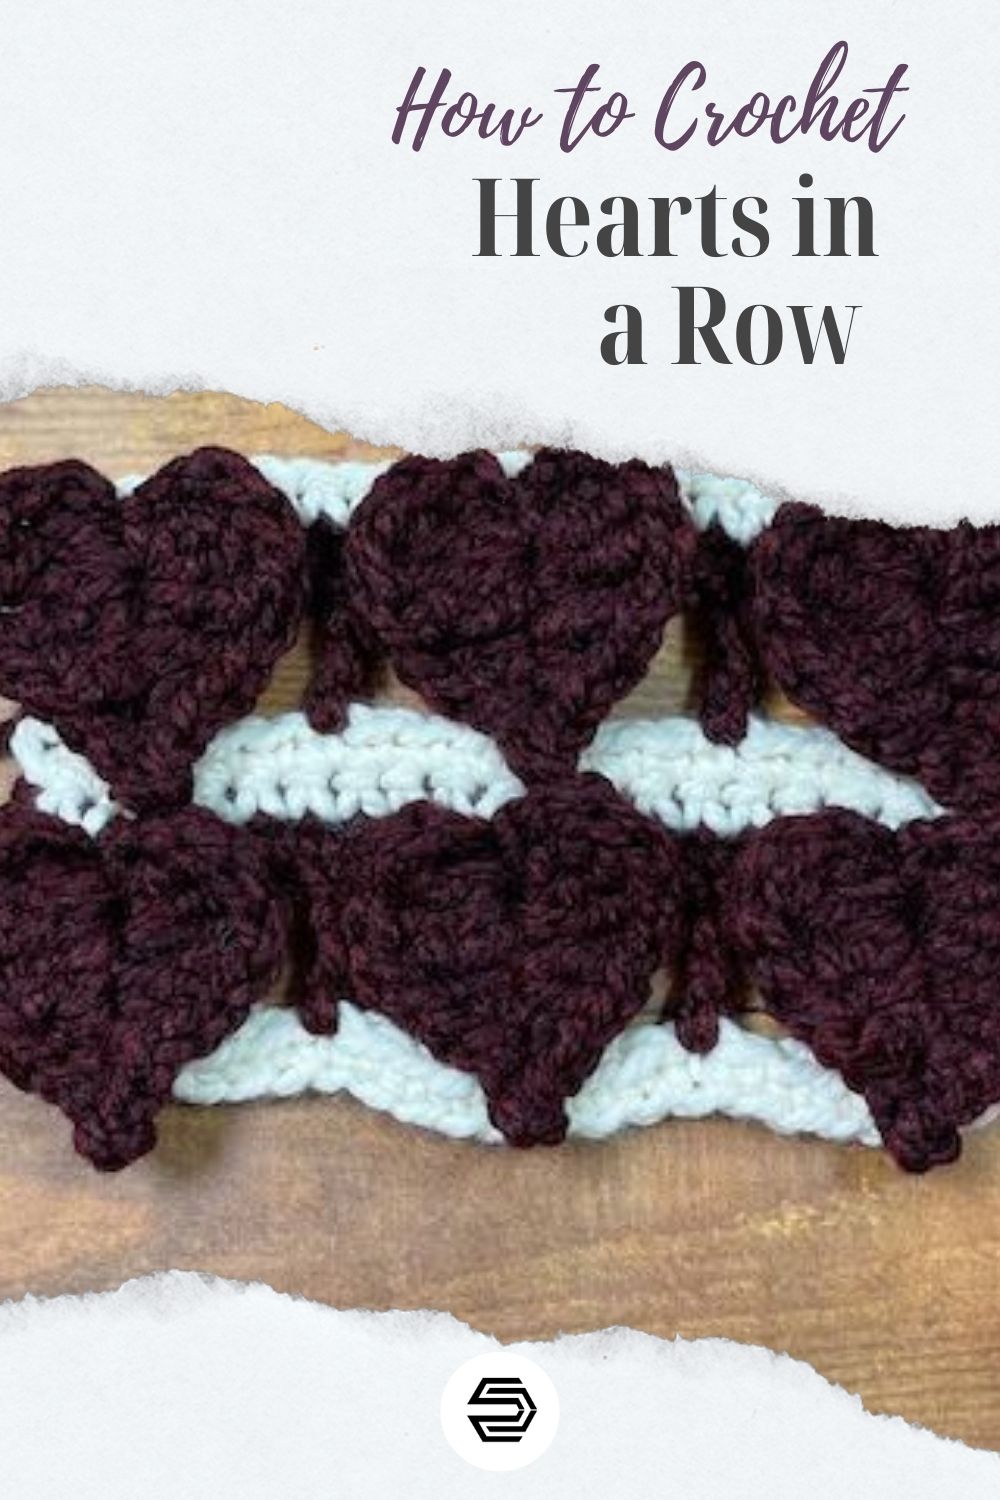 Learn how to create crochet hearts in a row that can be used in a variety of projects.